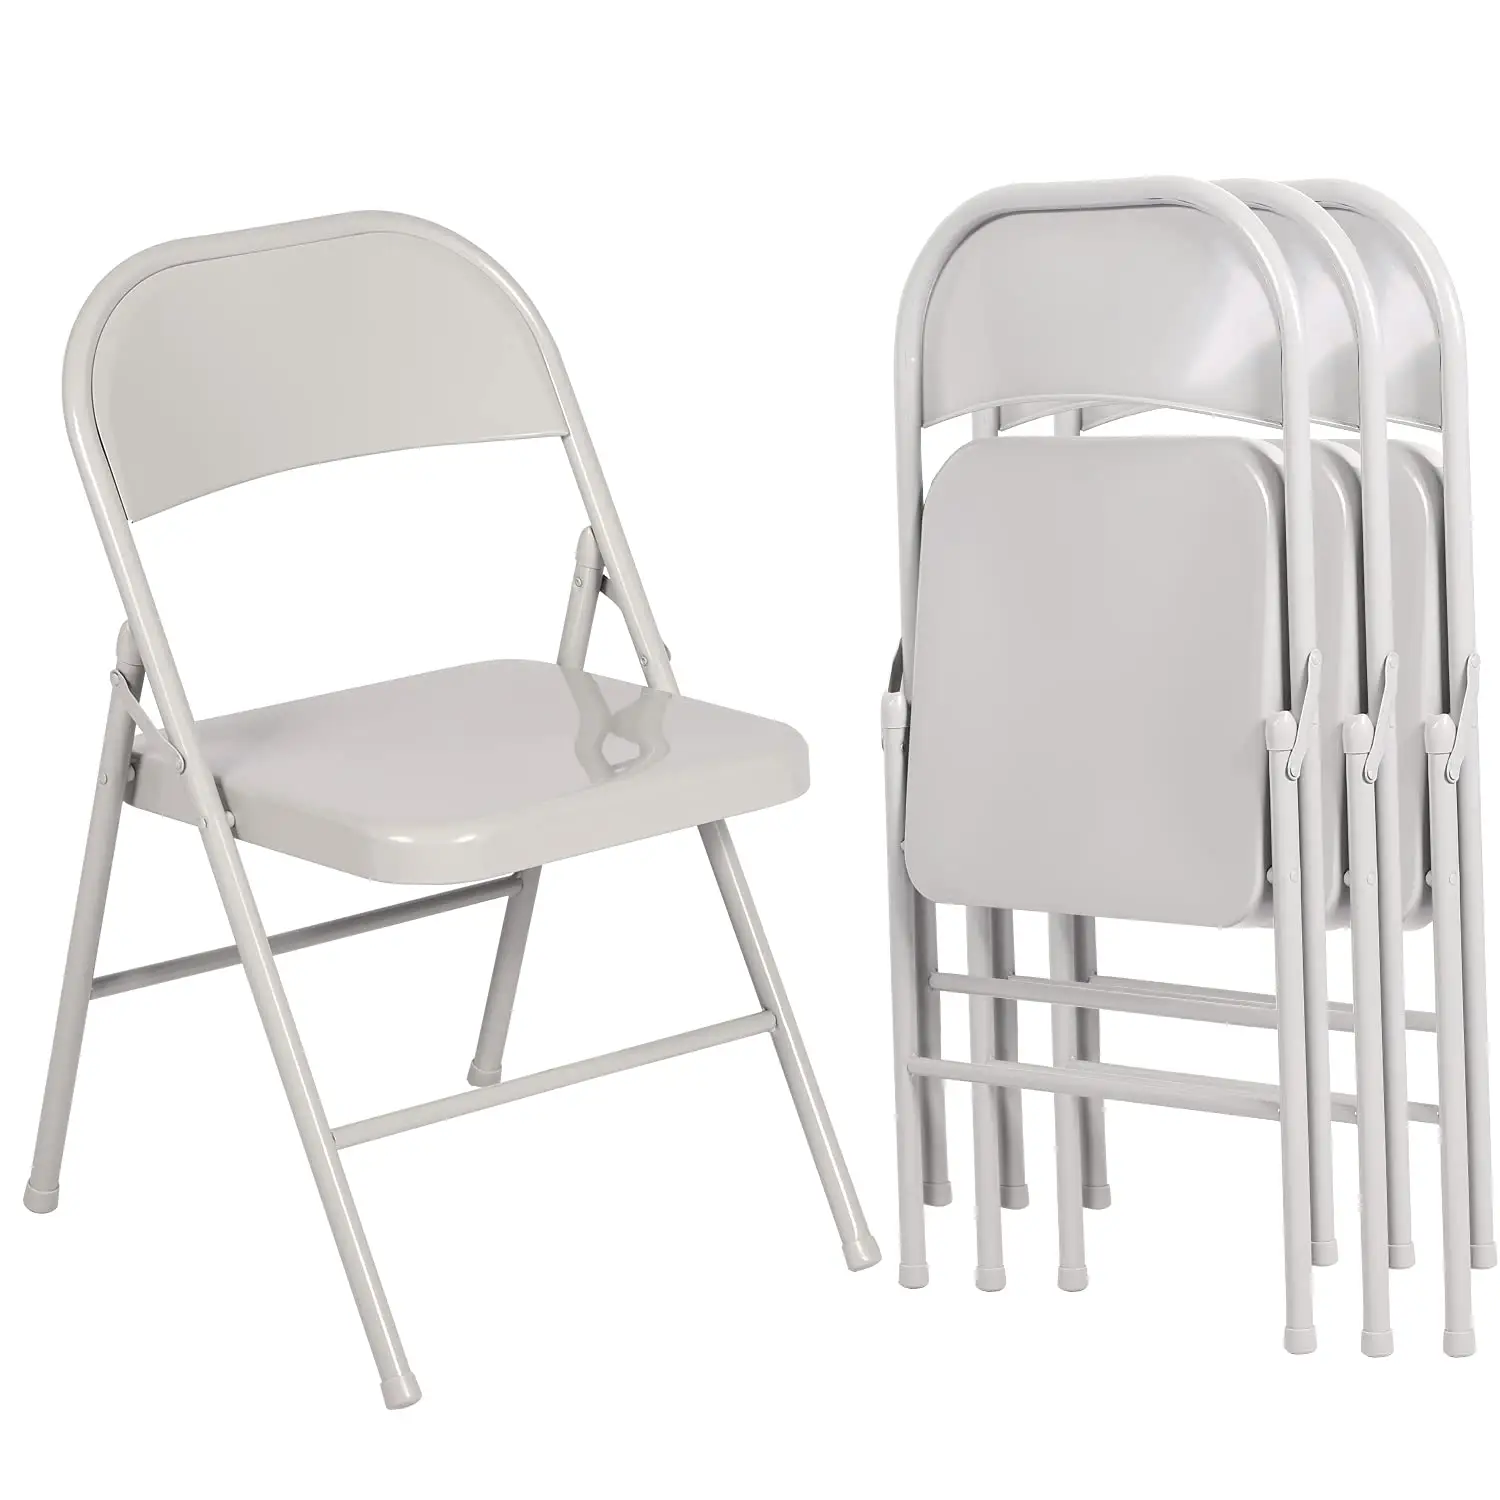 Garden Camping Furniture Industrial Outdoor Steel Iron Metal Folding Chair For Dining Room